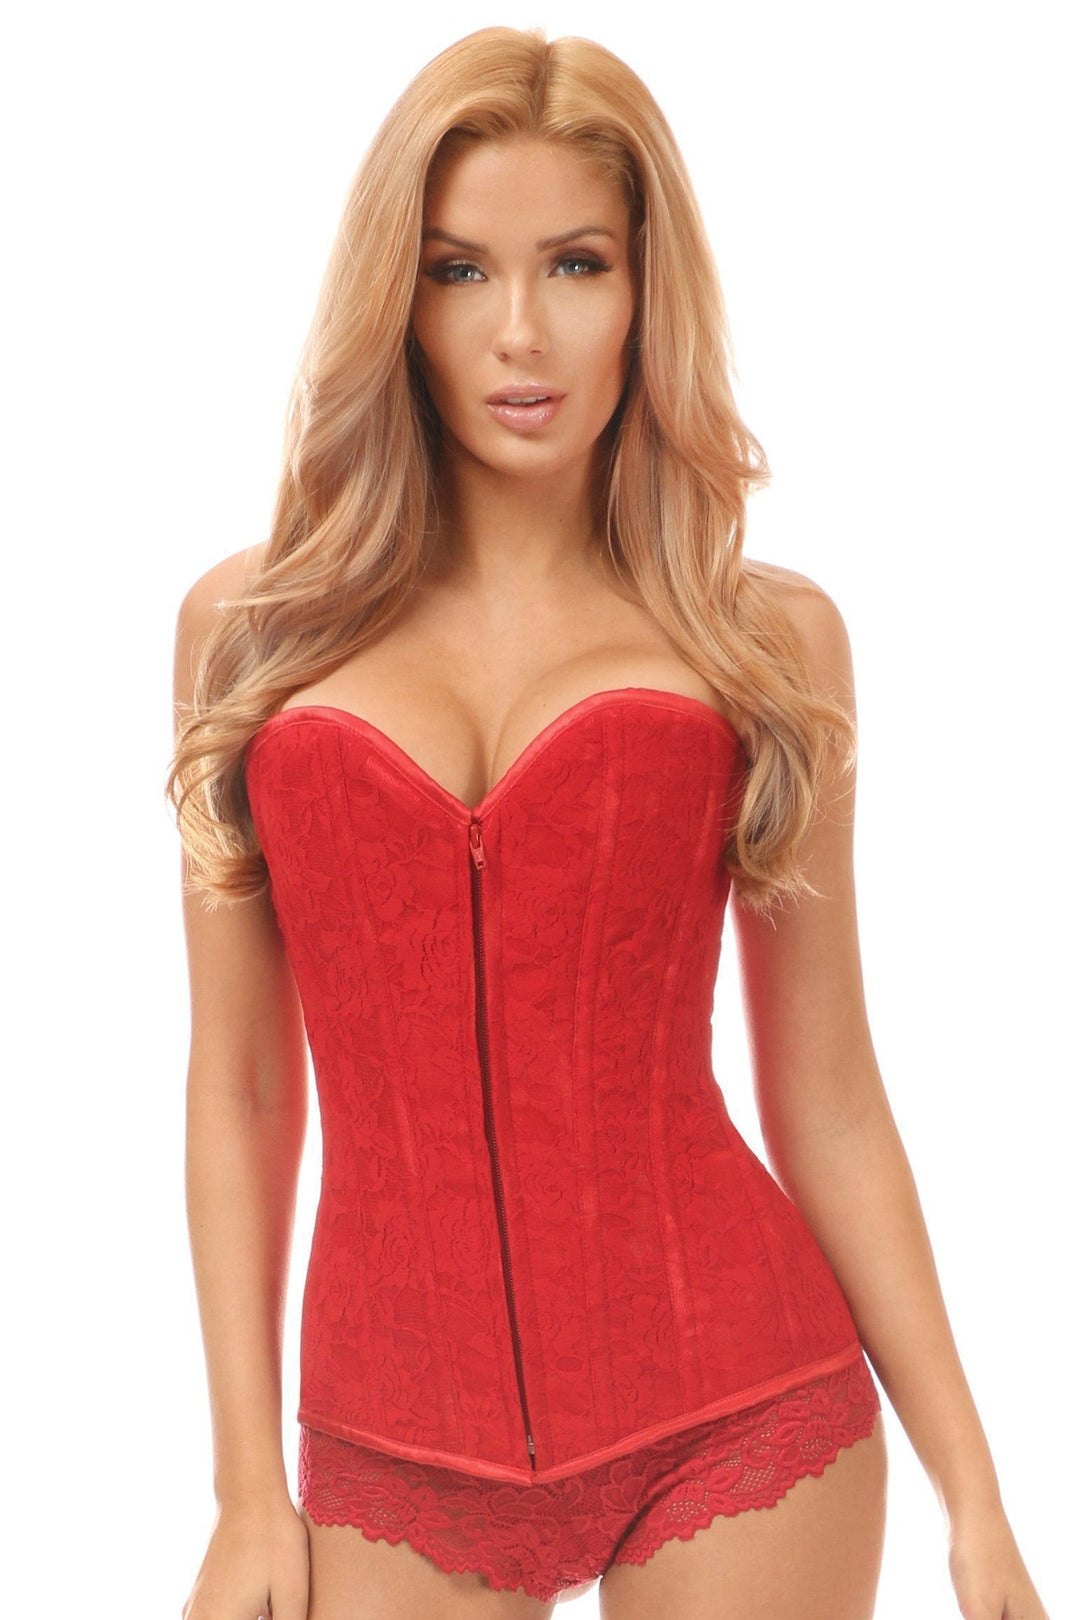 Lavish Red Lace Overbust Corset-Daisy Corsets-SEXYSHOES.COM